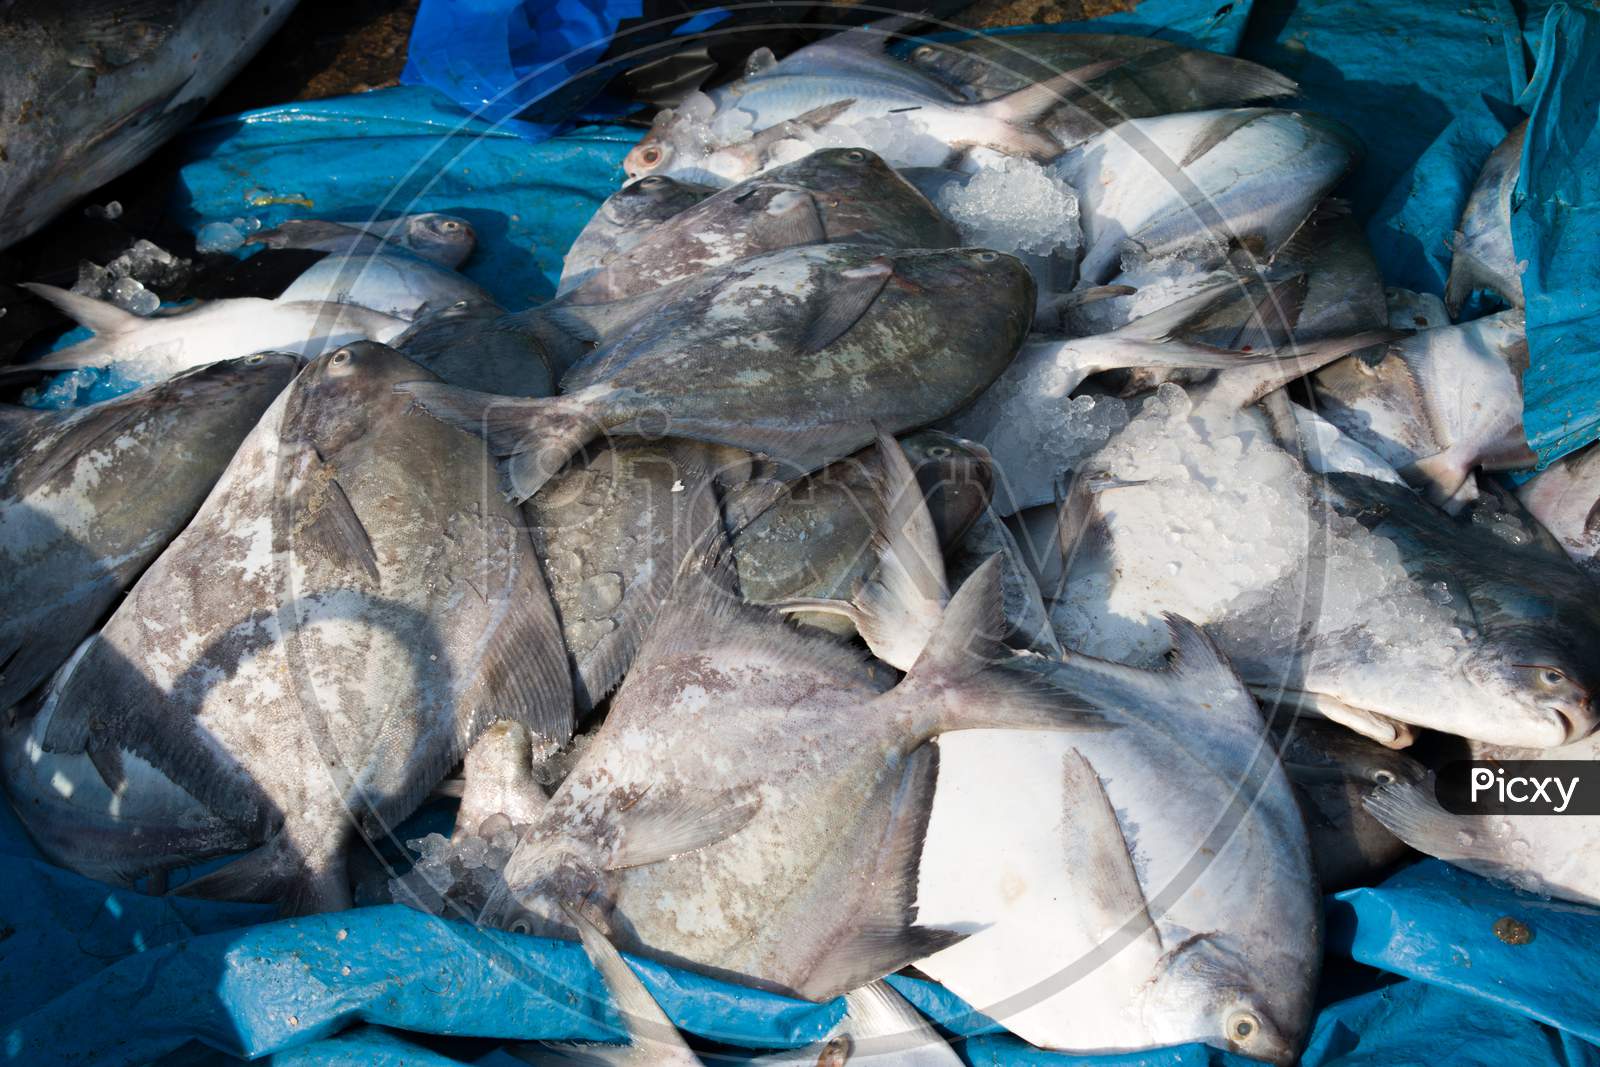 Collection Of Pomfret Fishes For Sale In The Market.